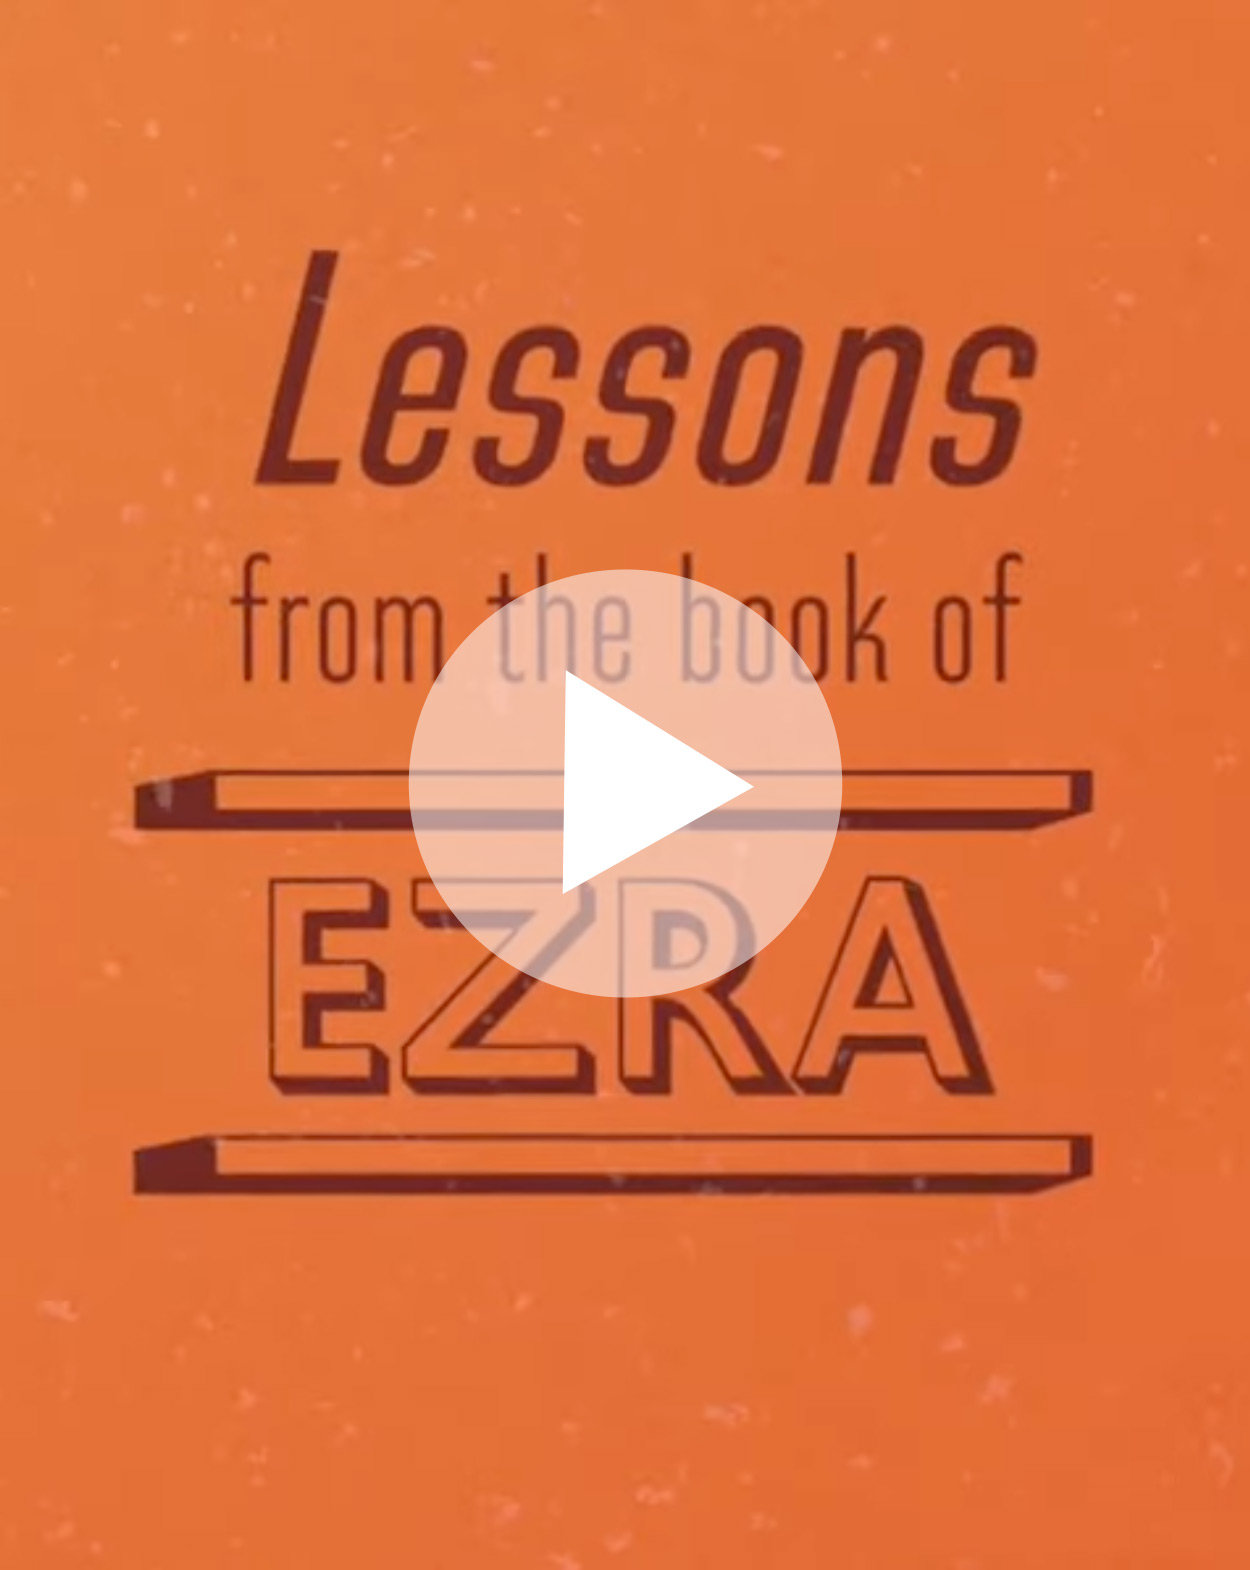 Lessons from the book of Ezra